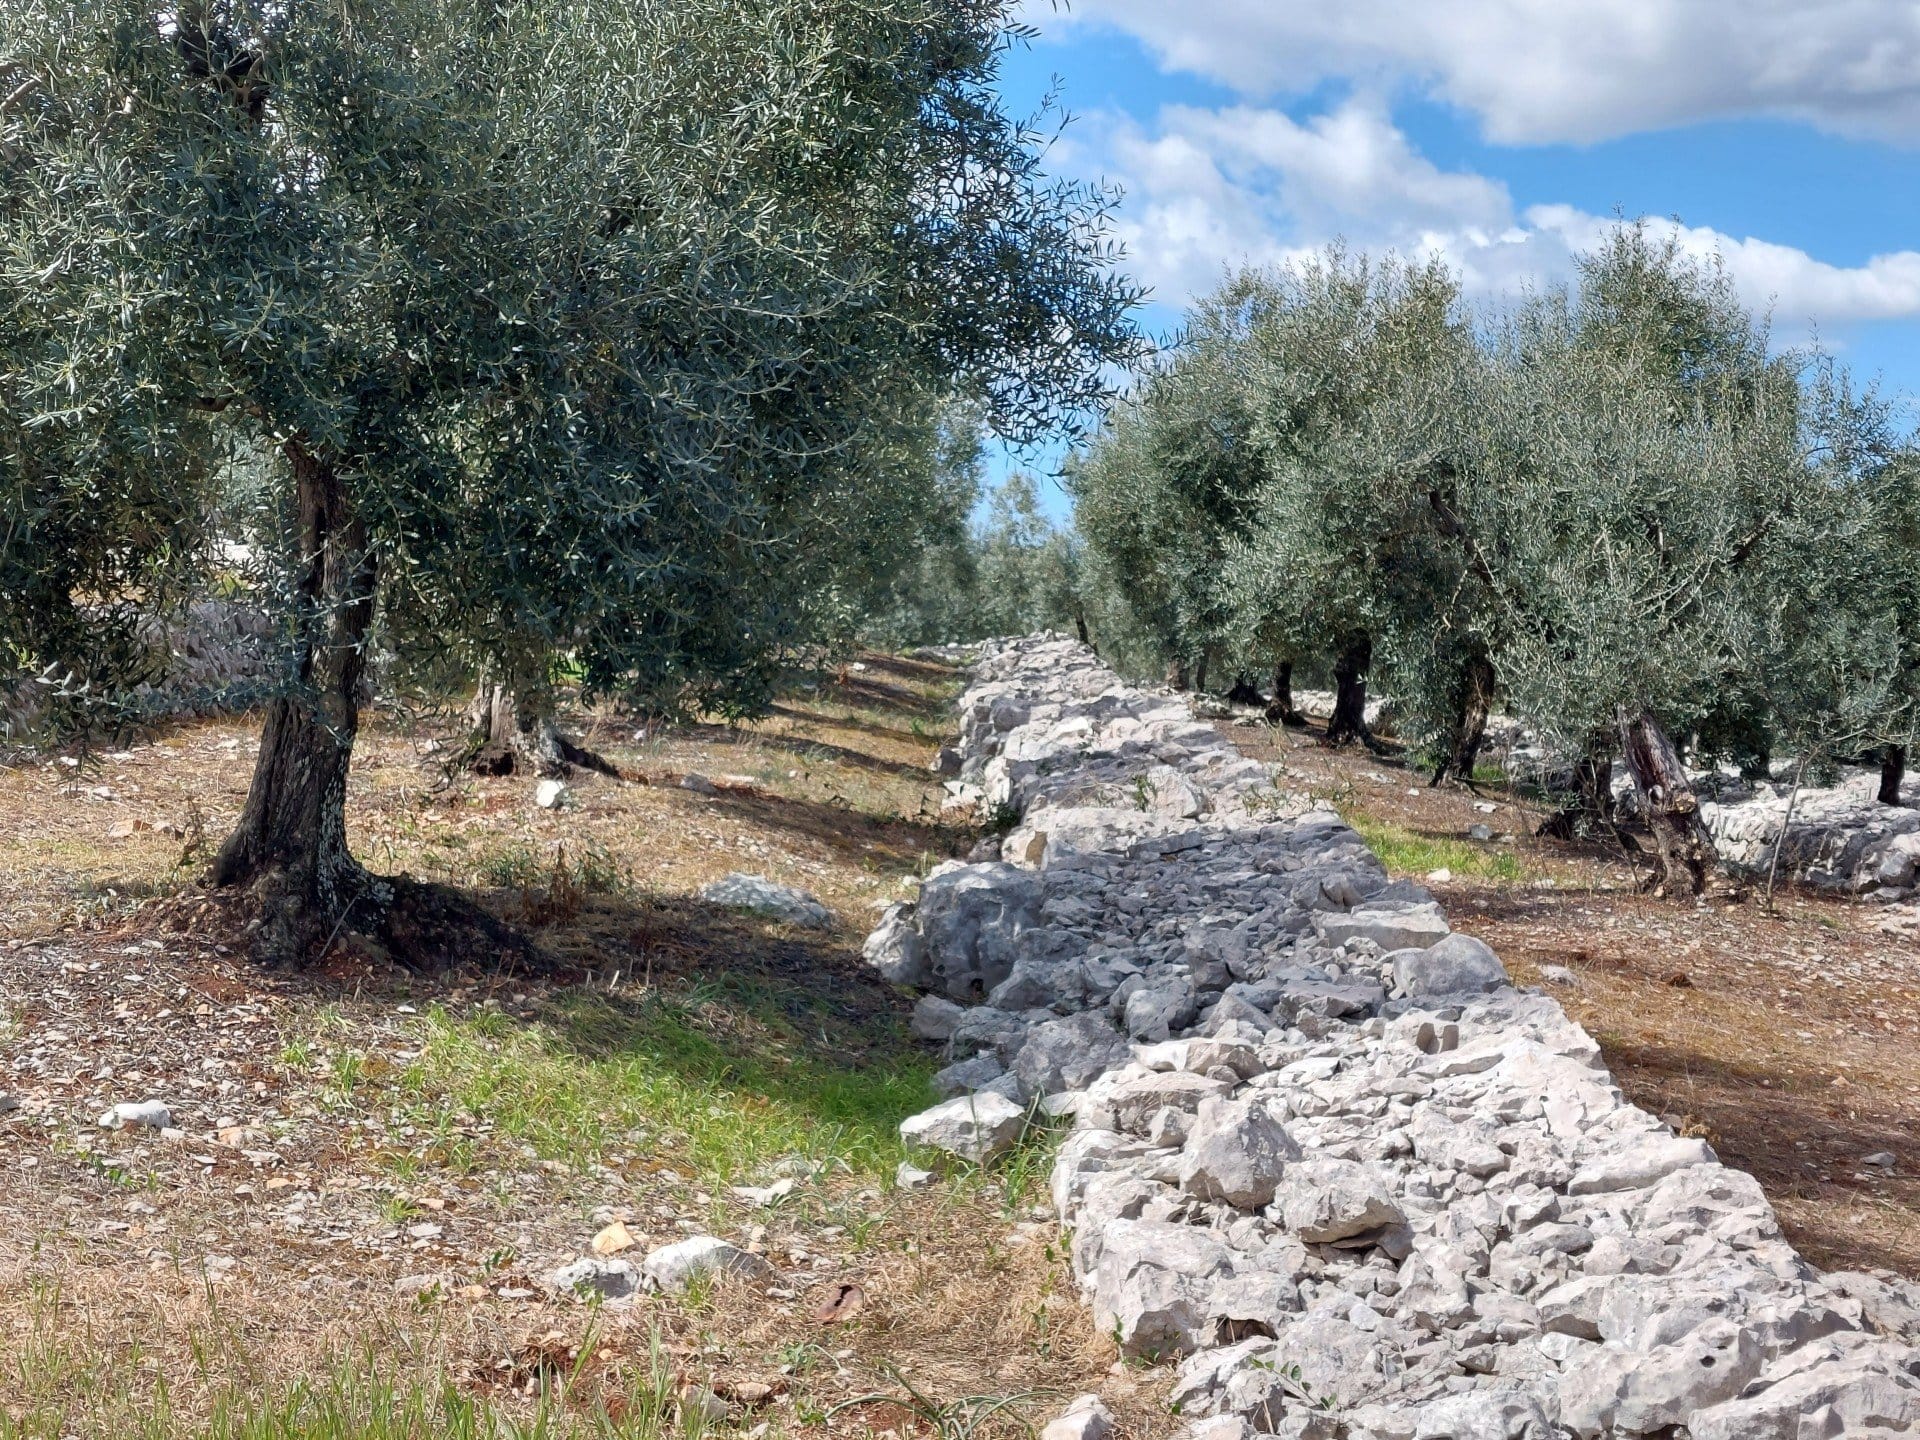 europe-the-best-olive-oils-competitions-production-quality-of-central-italian-producers-shines-through-after-difficult-harvest-olive-oil-times